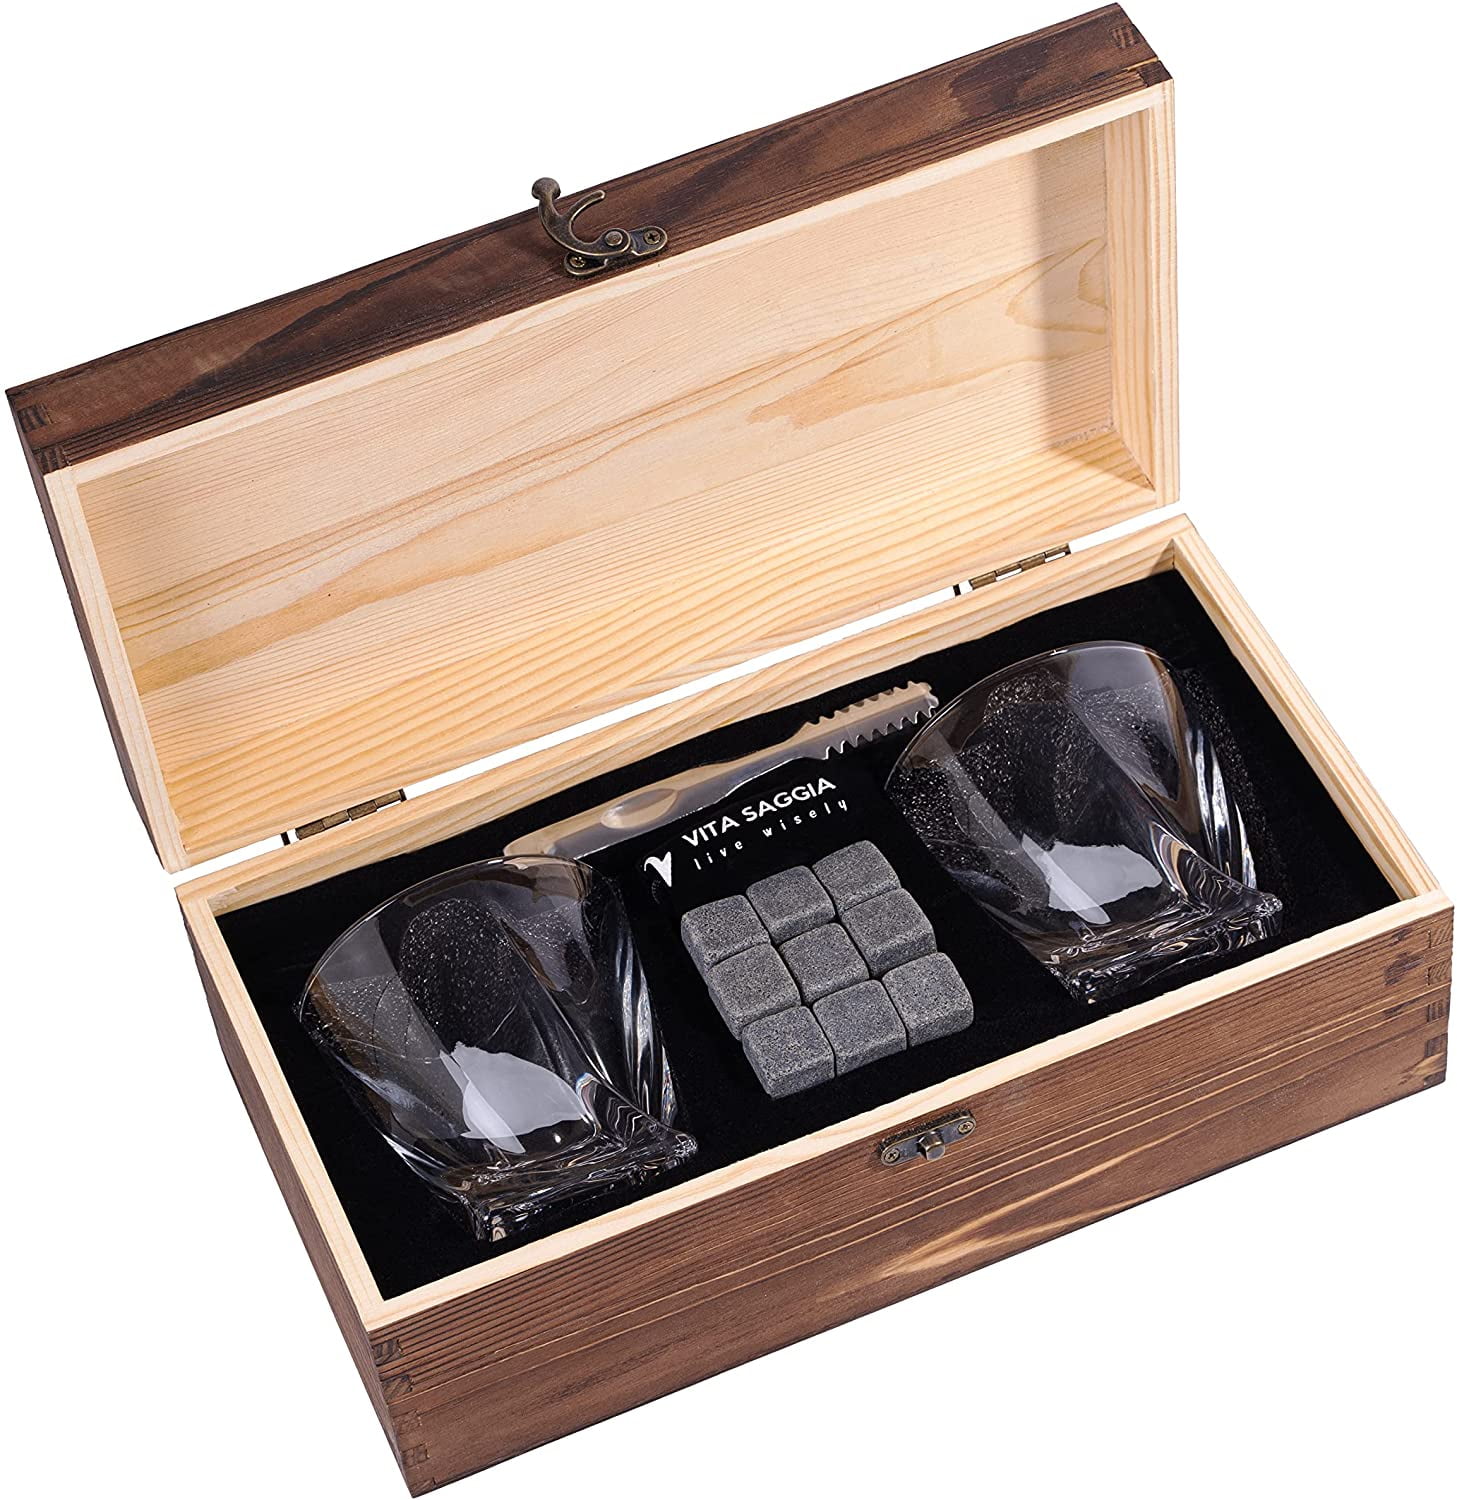 Bullet Shaped Whiskey Stones Gift Set For Men With Vintage Wooden Case,  Metal Stainless Steel Ice Cubes - 6 Pack, Cool Gadgets For Men Dad  Boyfriend